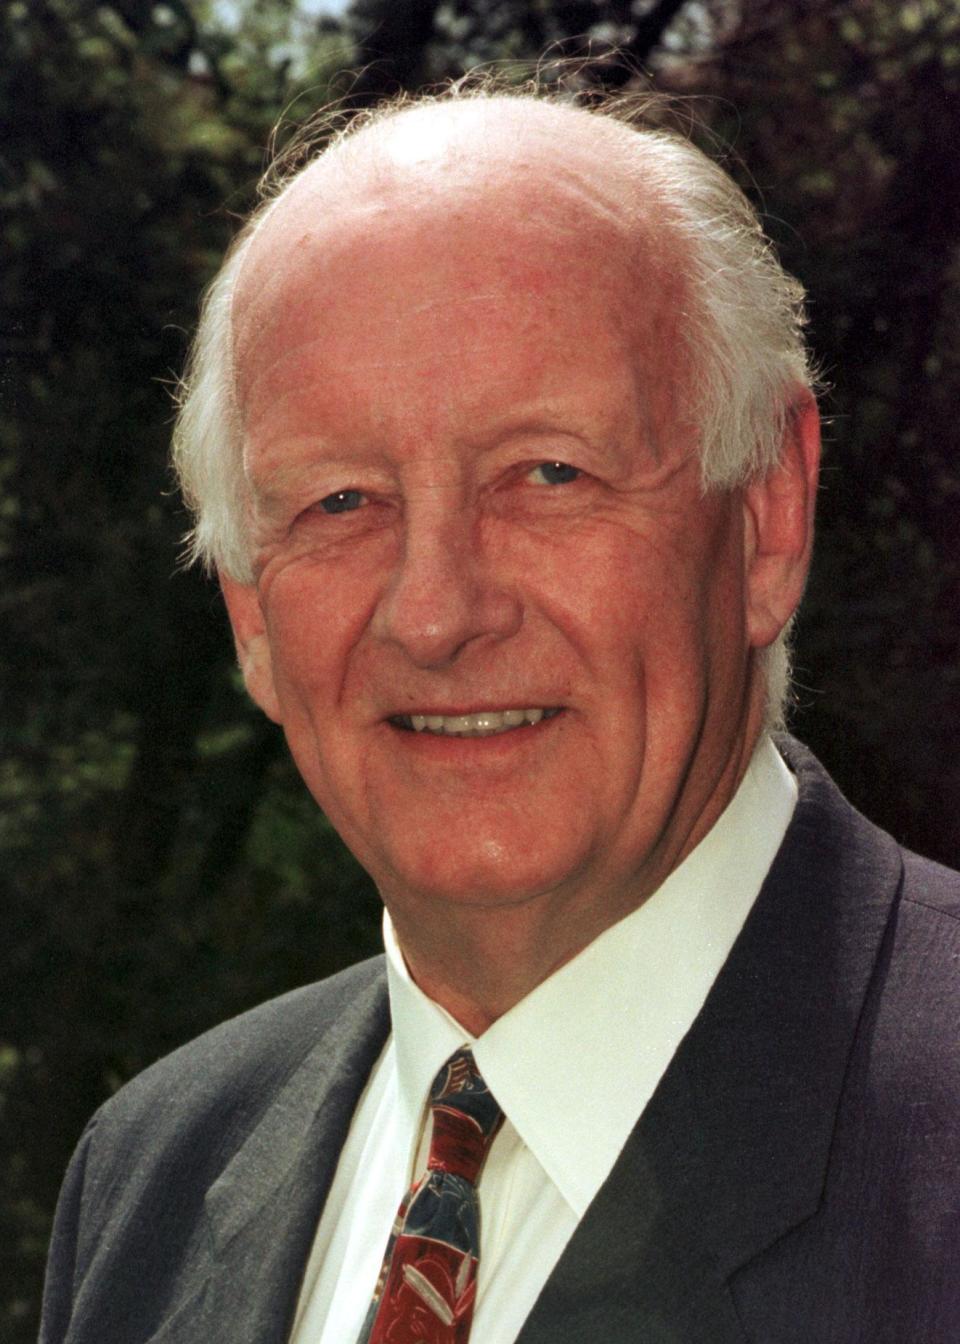 Frank Bough was sacked by both the BBC and ITV for private life transgressions